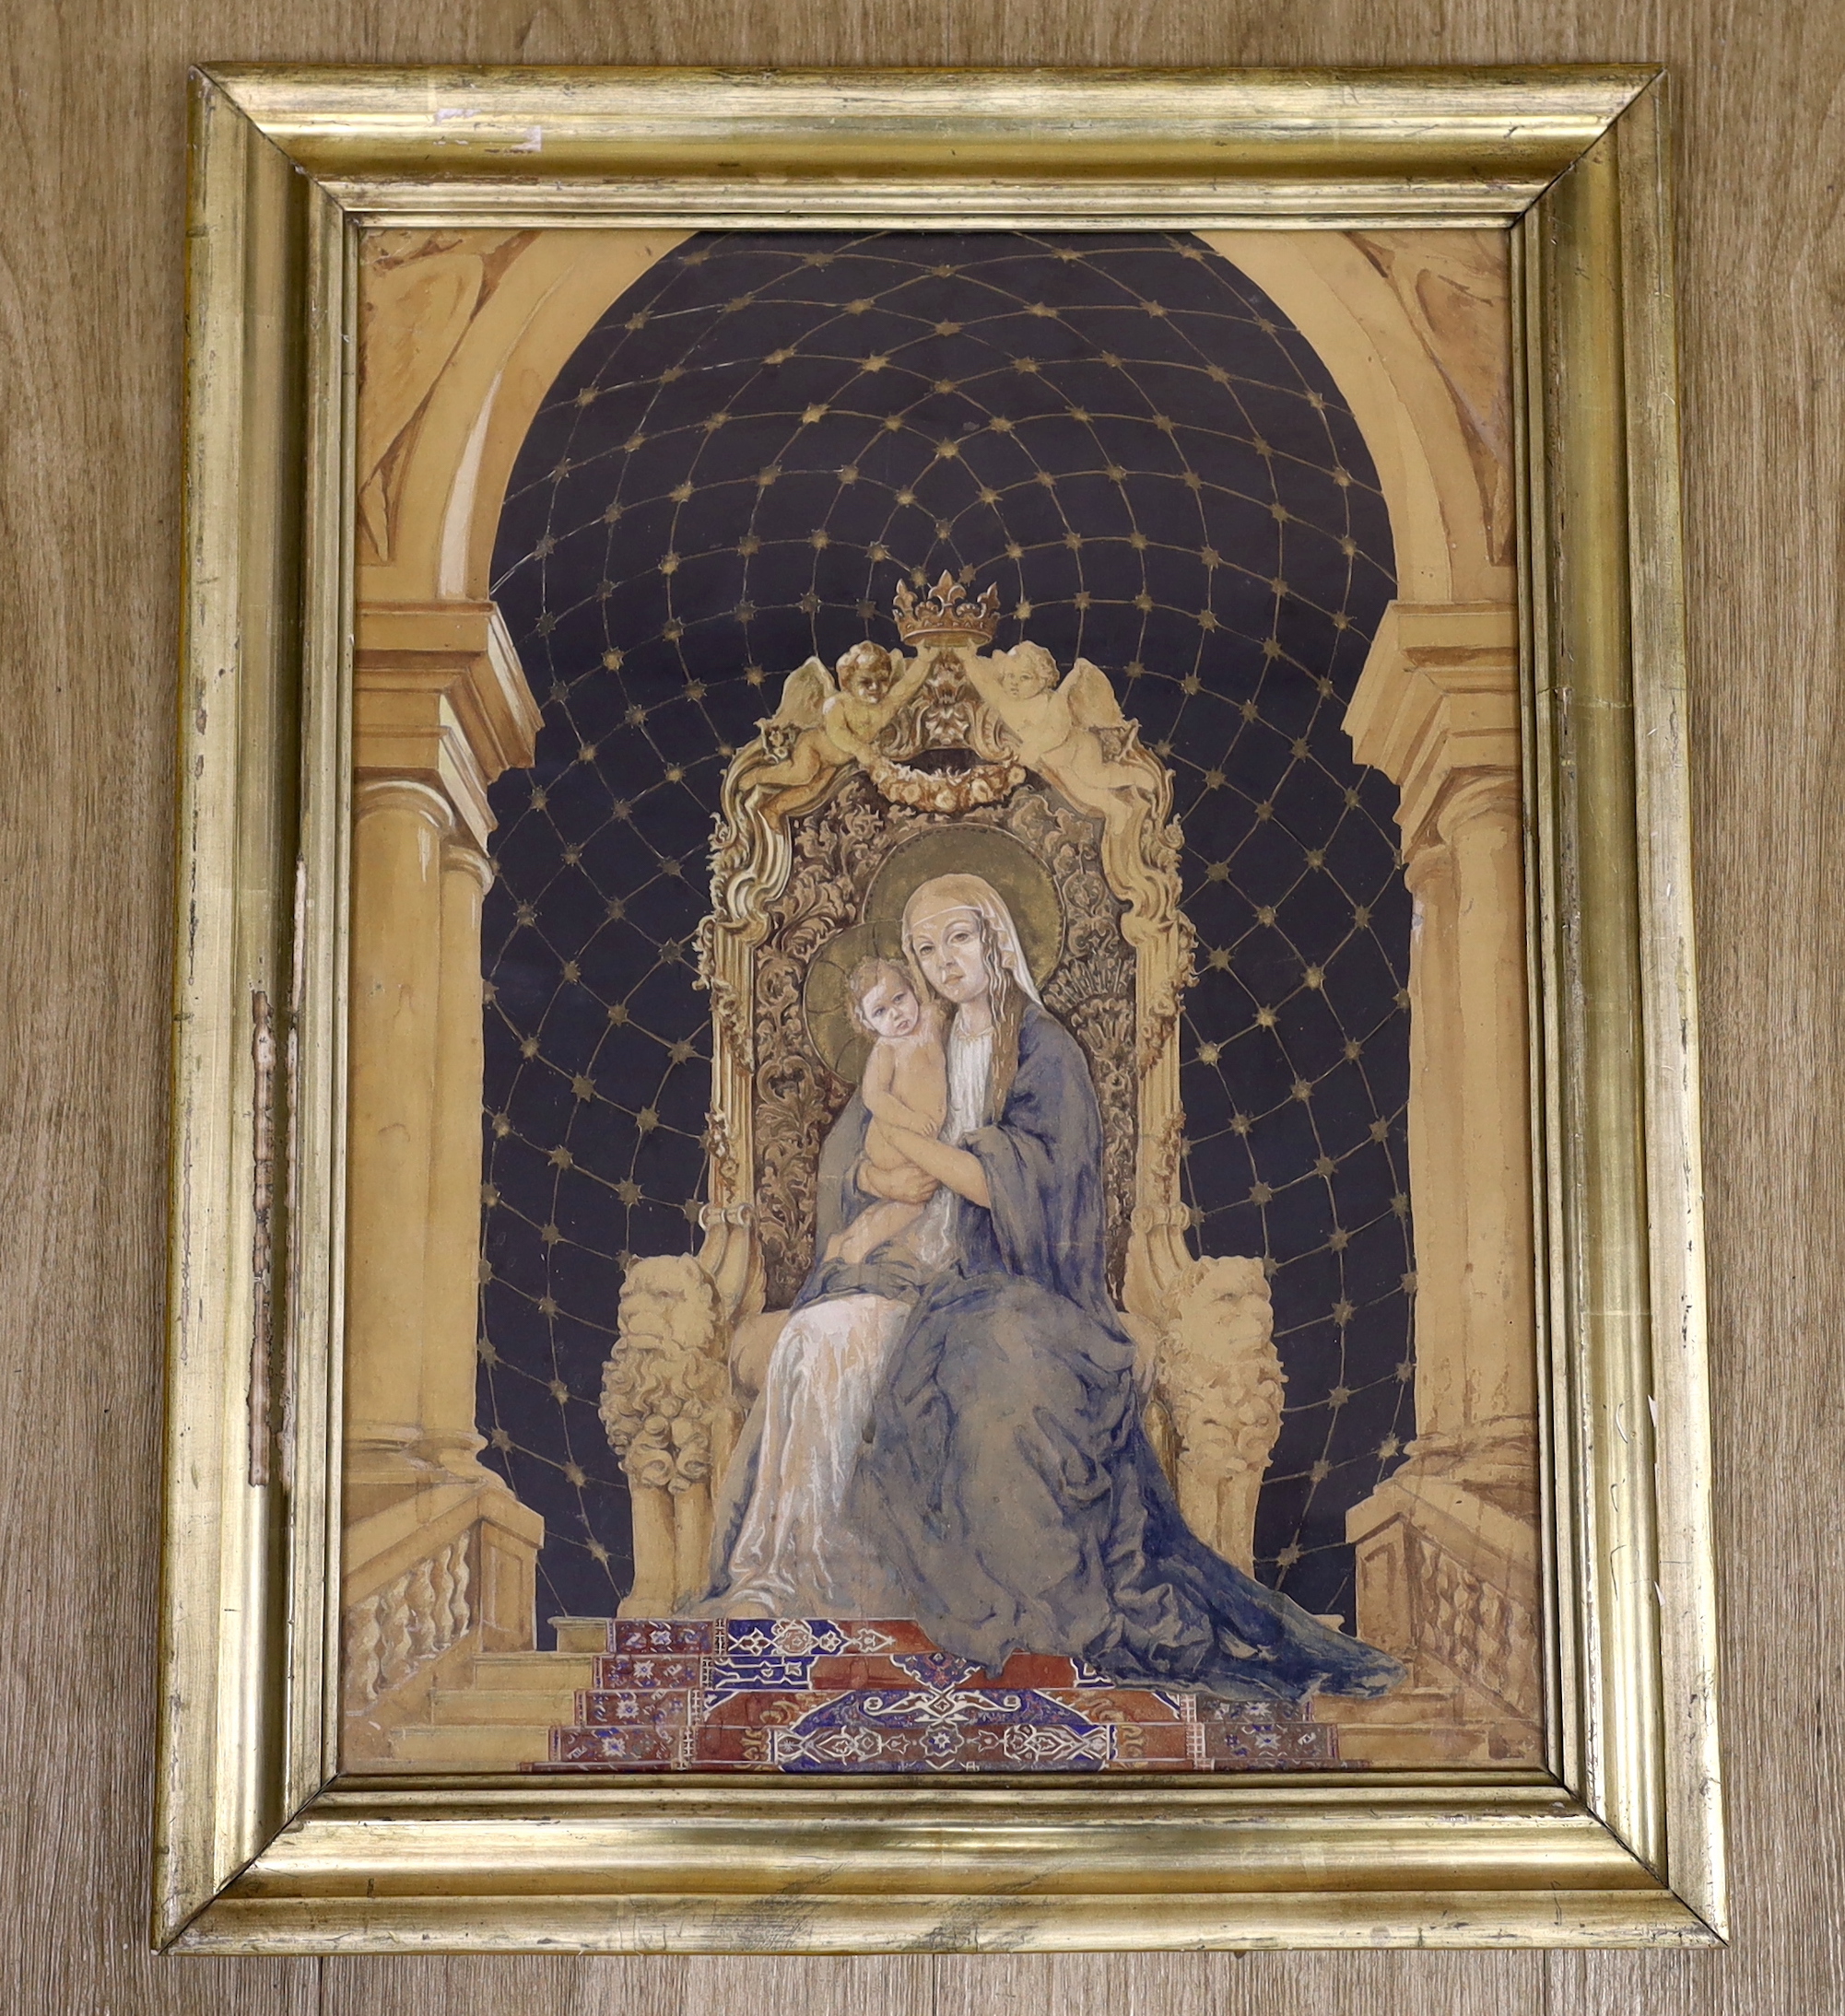 Continental School, heightened watercolour, Study of the Virgin Mary and Child seated on a throne, unsigned, 47 x 35cm